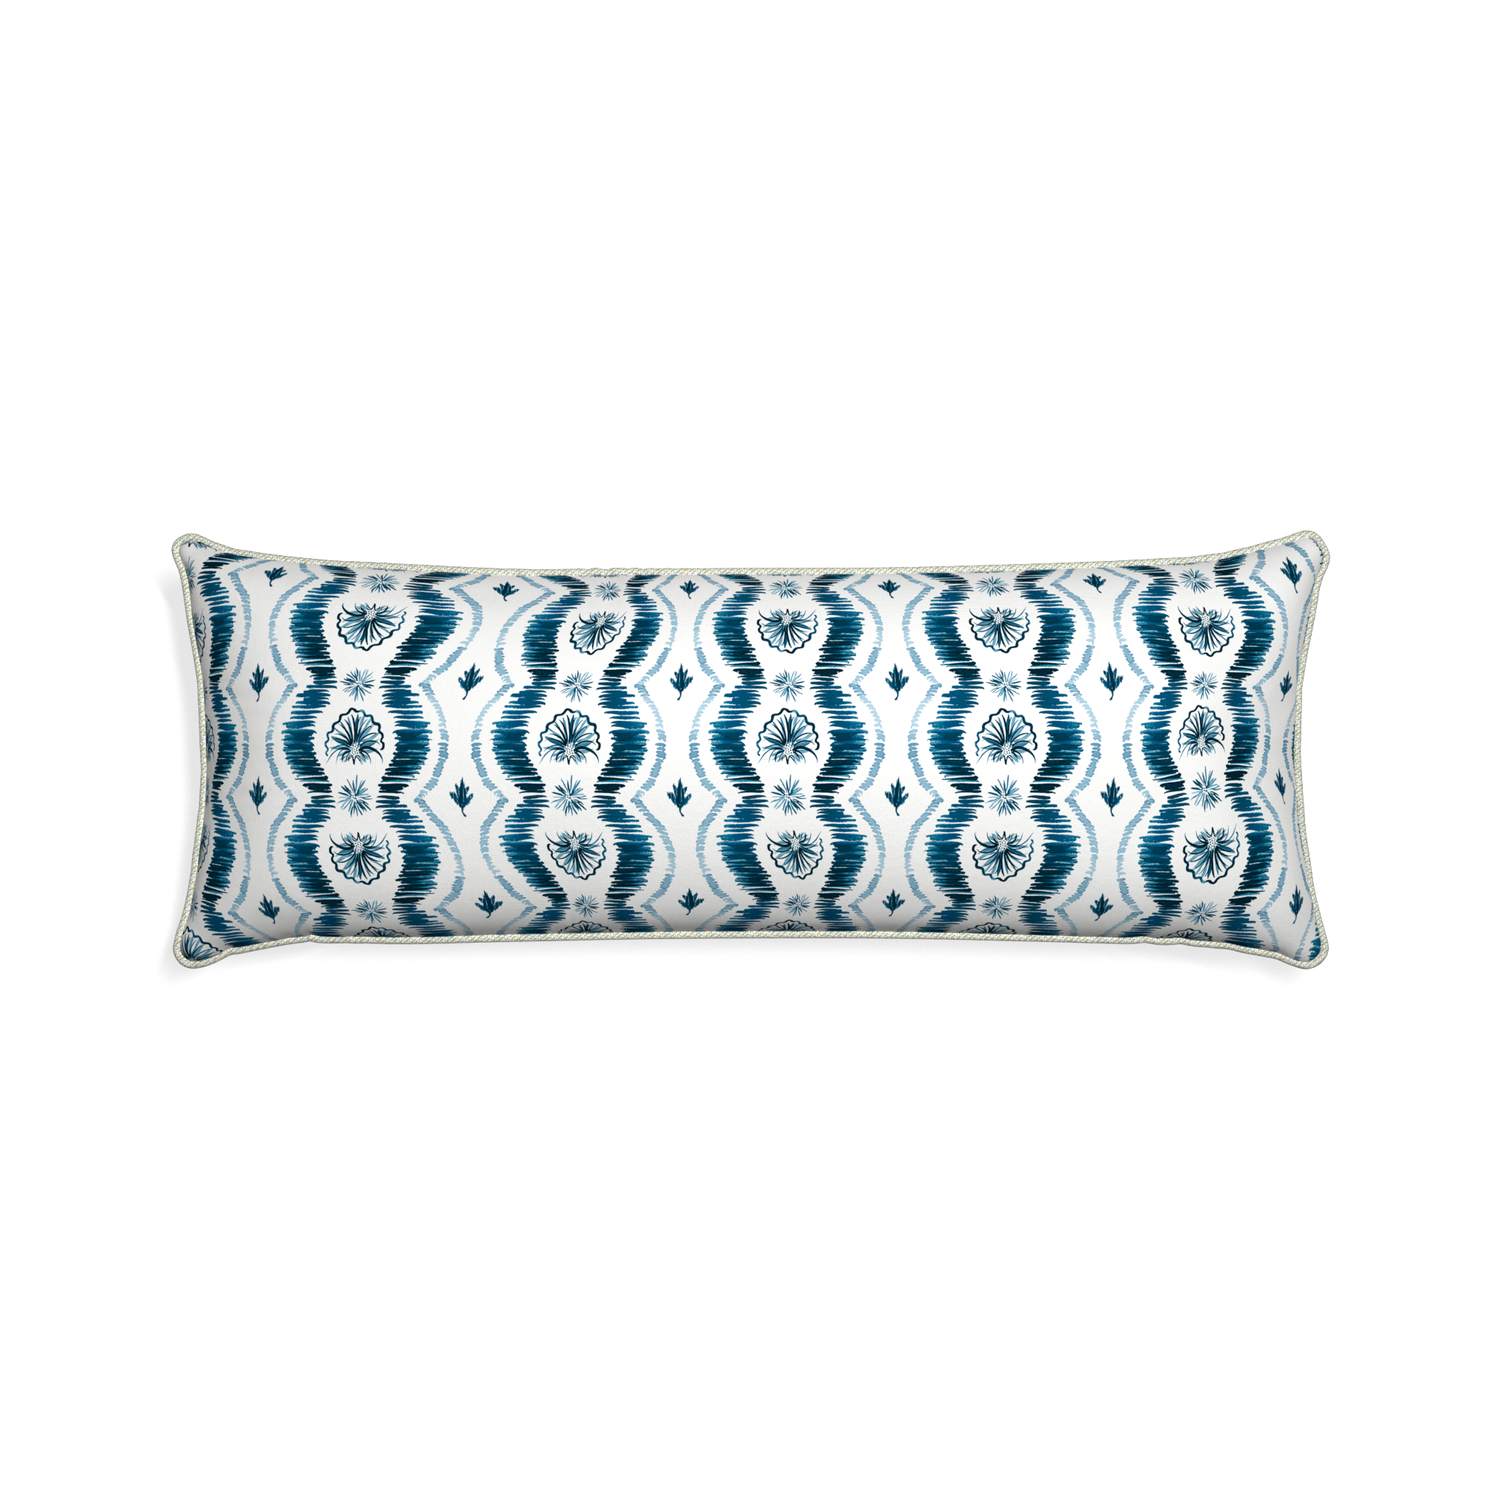 Xl-lumbar alice custom blue ikatpillow with l piping on white background